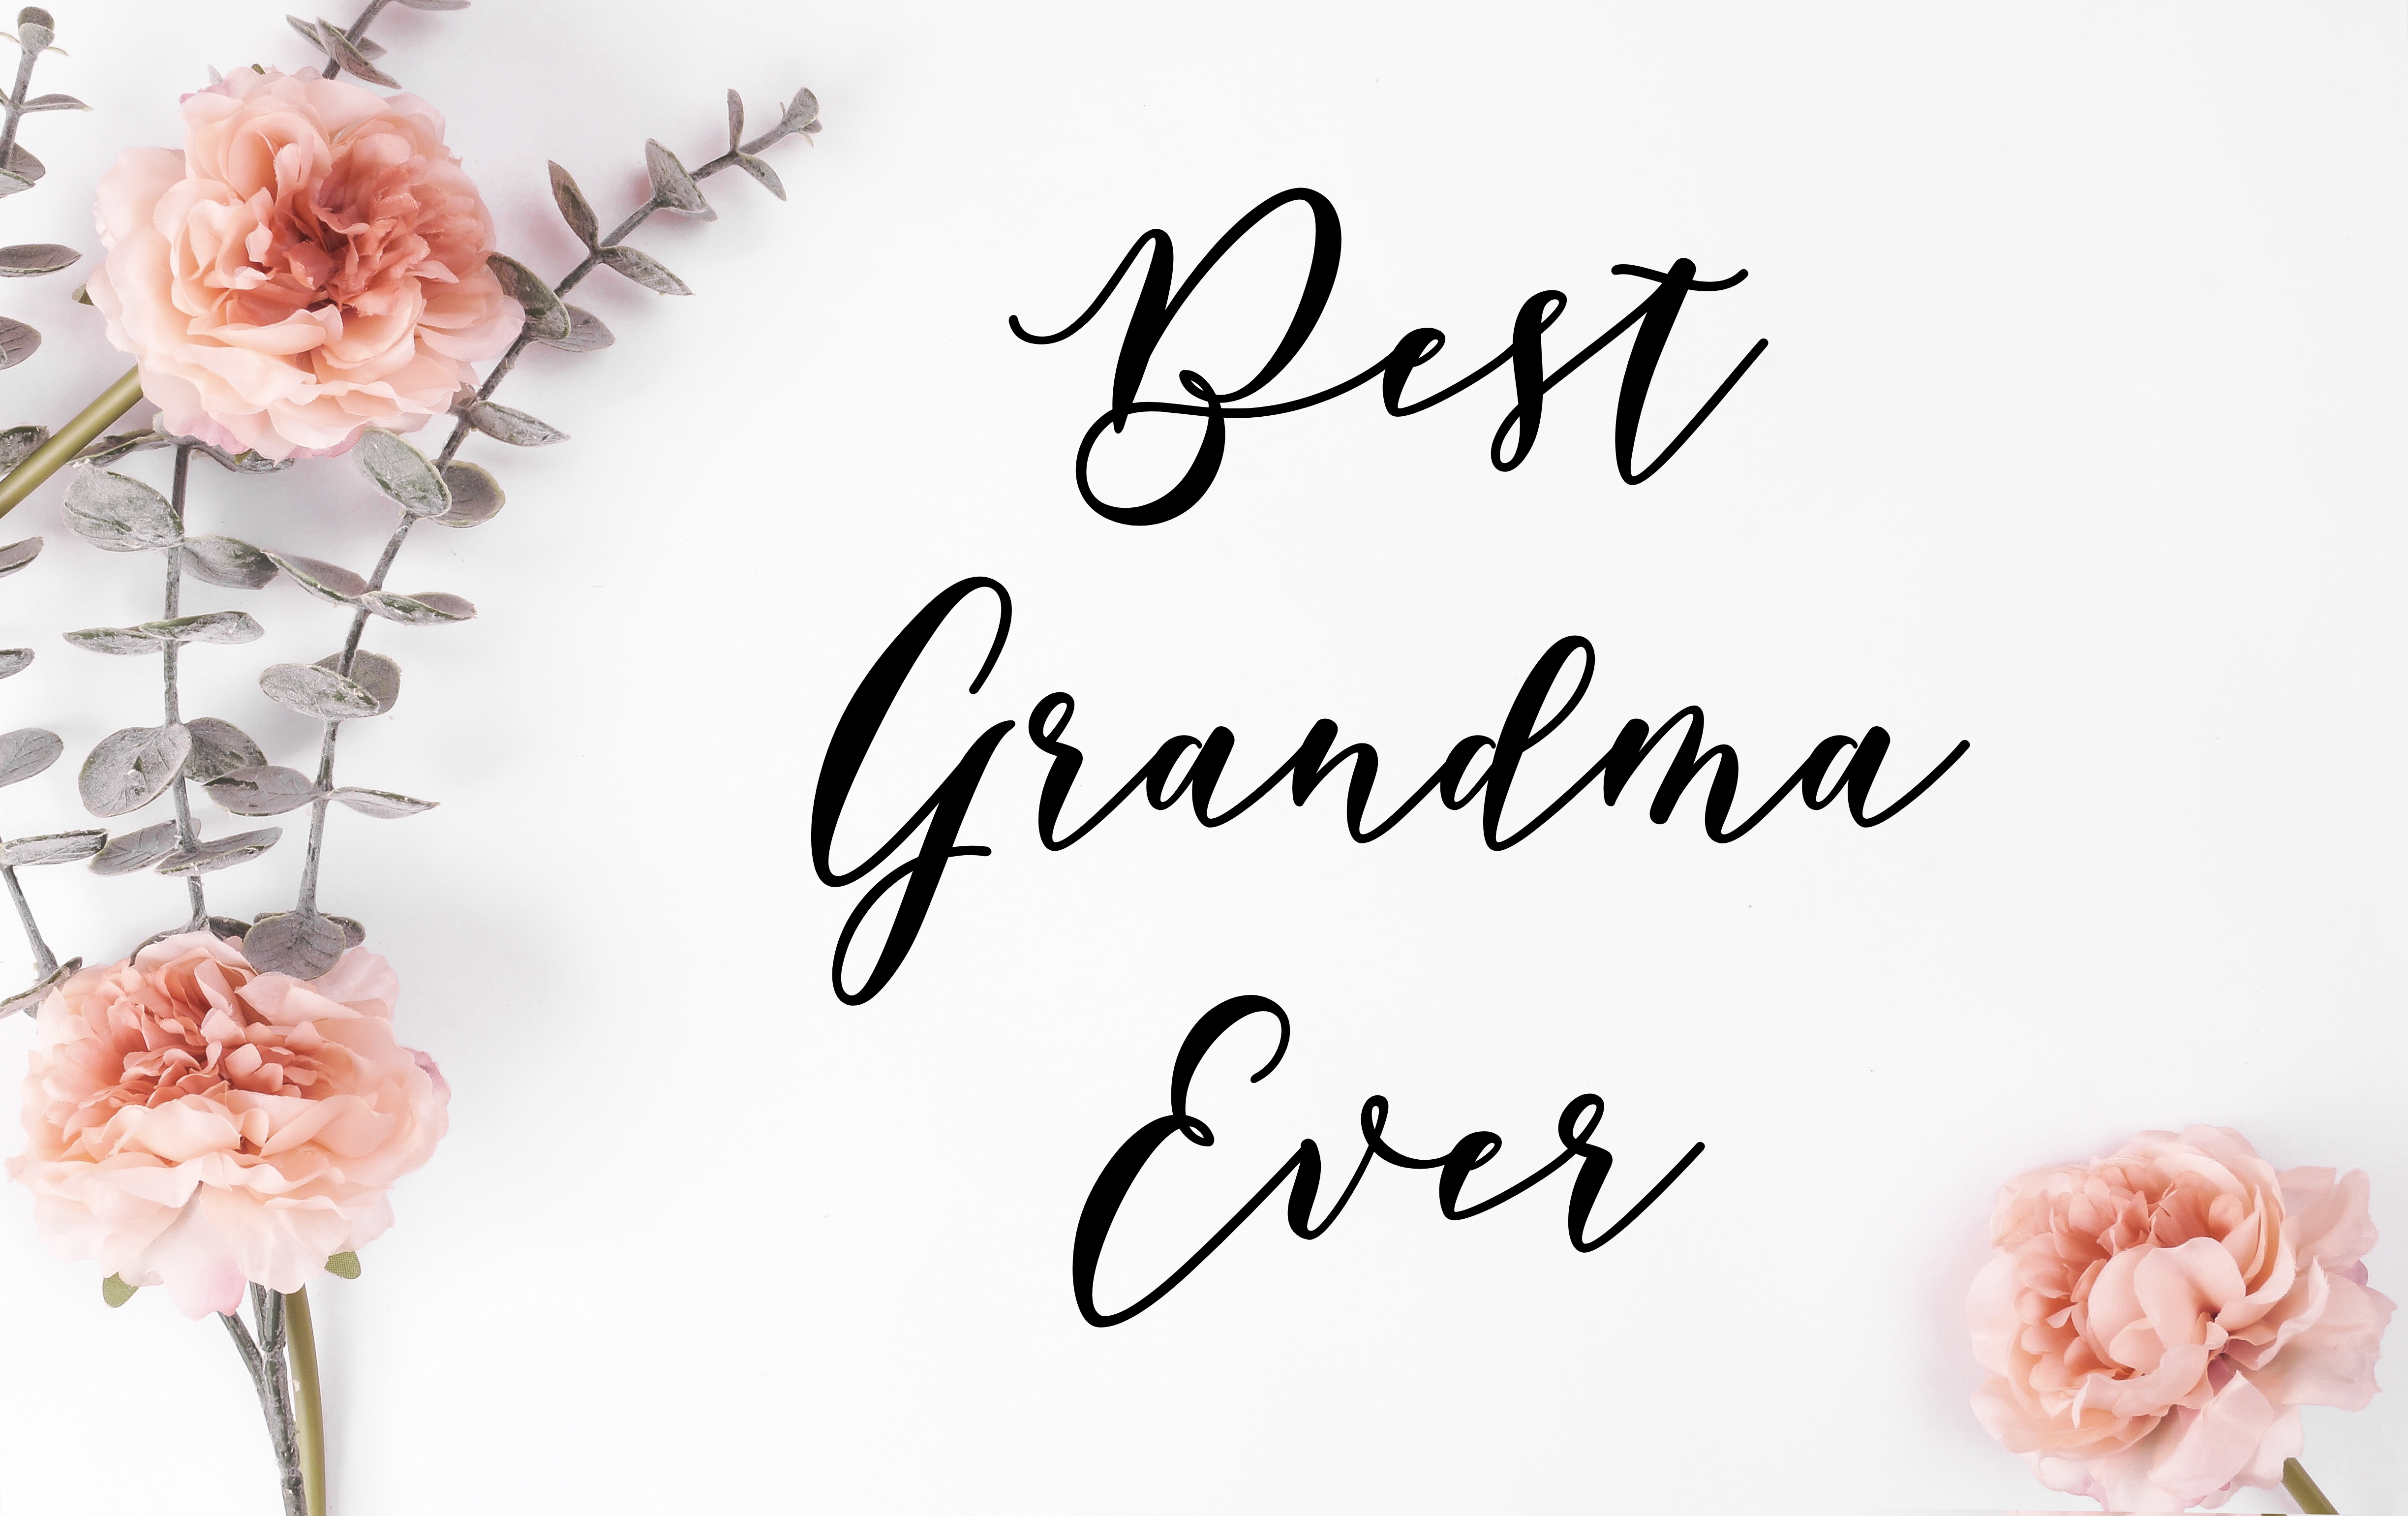 Best Grandma Ever Decal - Holiday Grandma/Nana/Gigi/Grammie/Mother/Mom Vinyl Decals for Home, Gifts, Businesses and More! C16